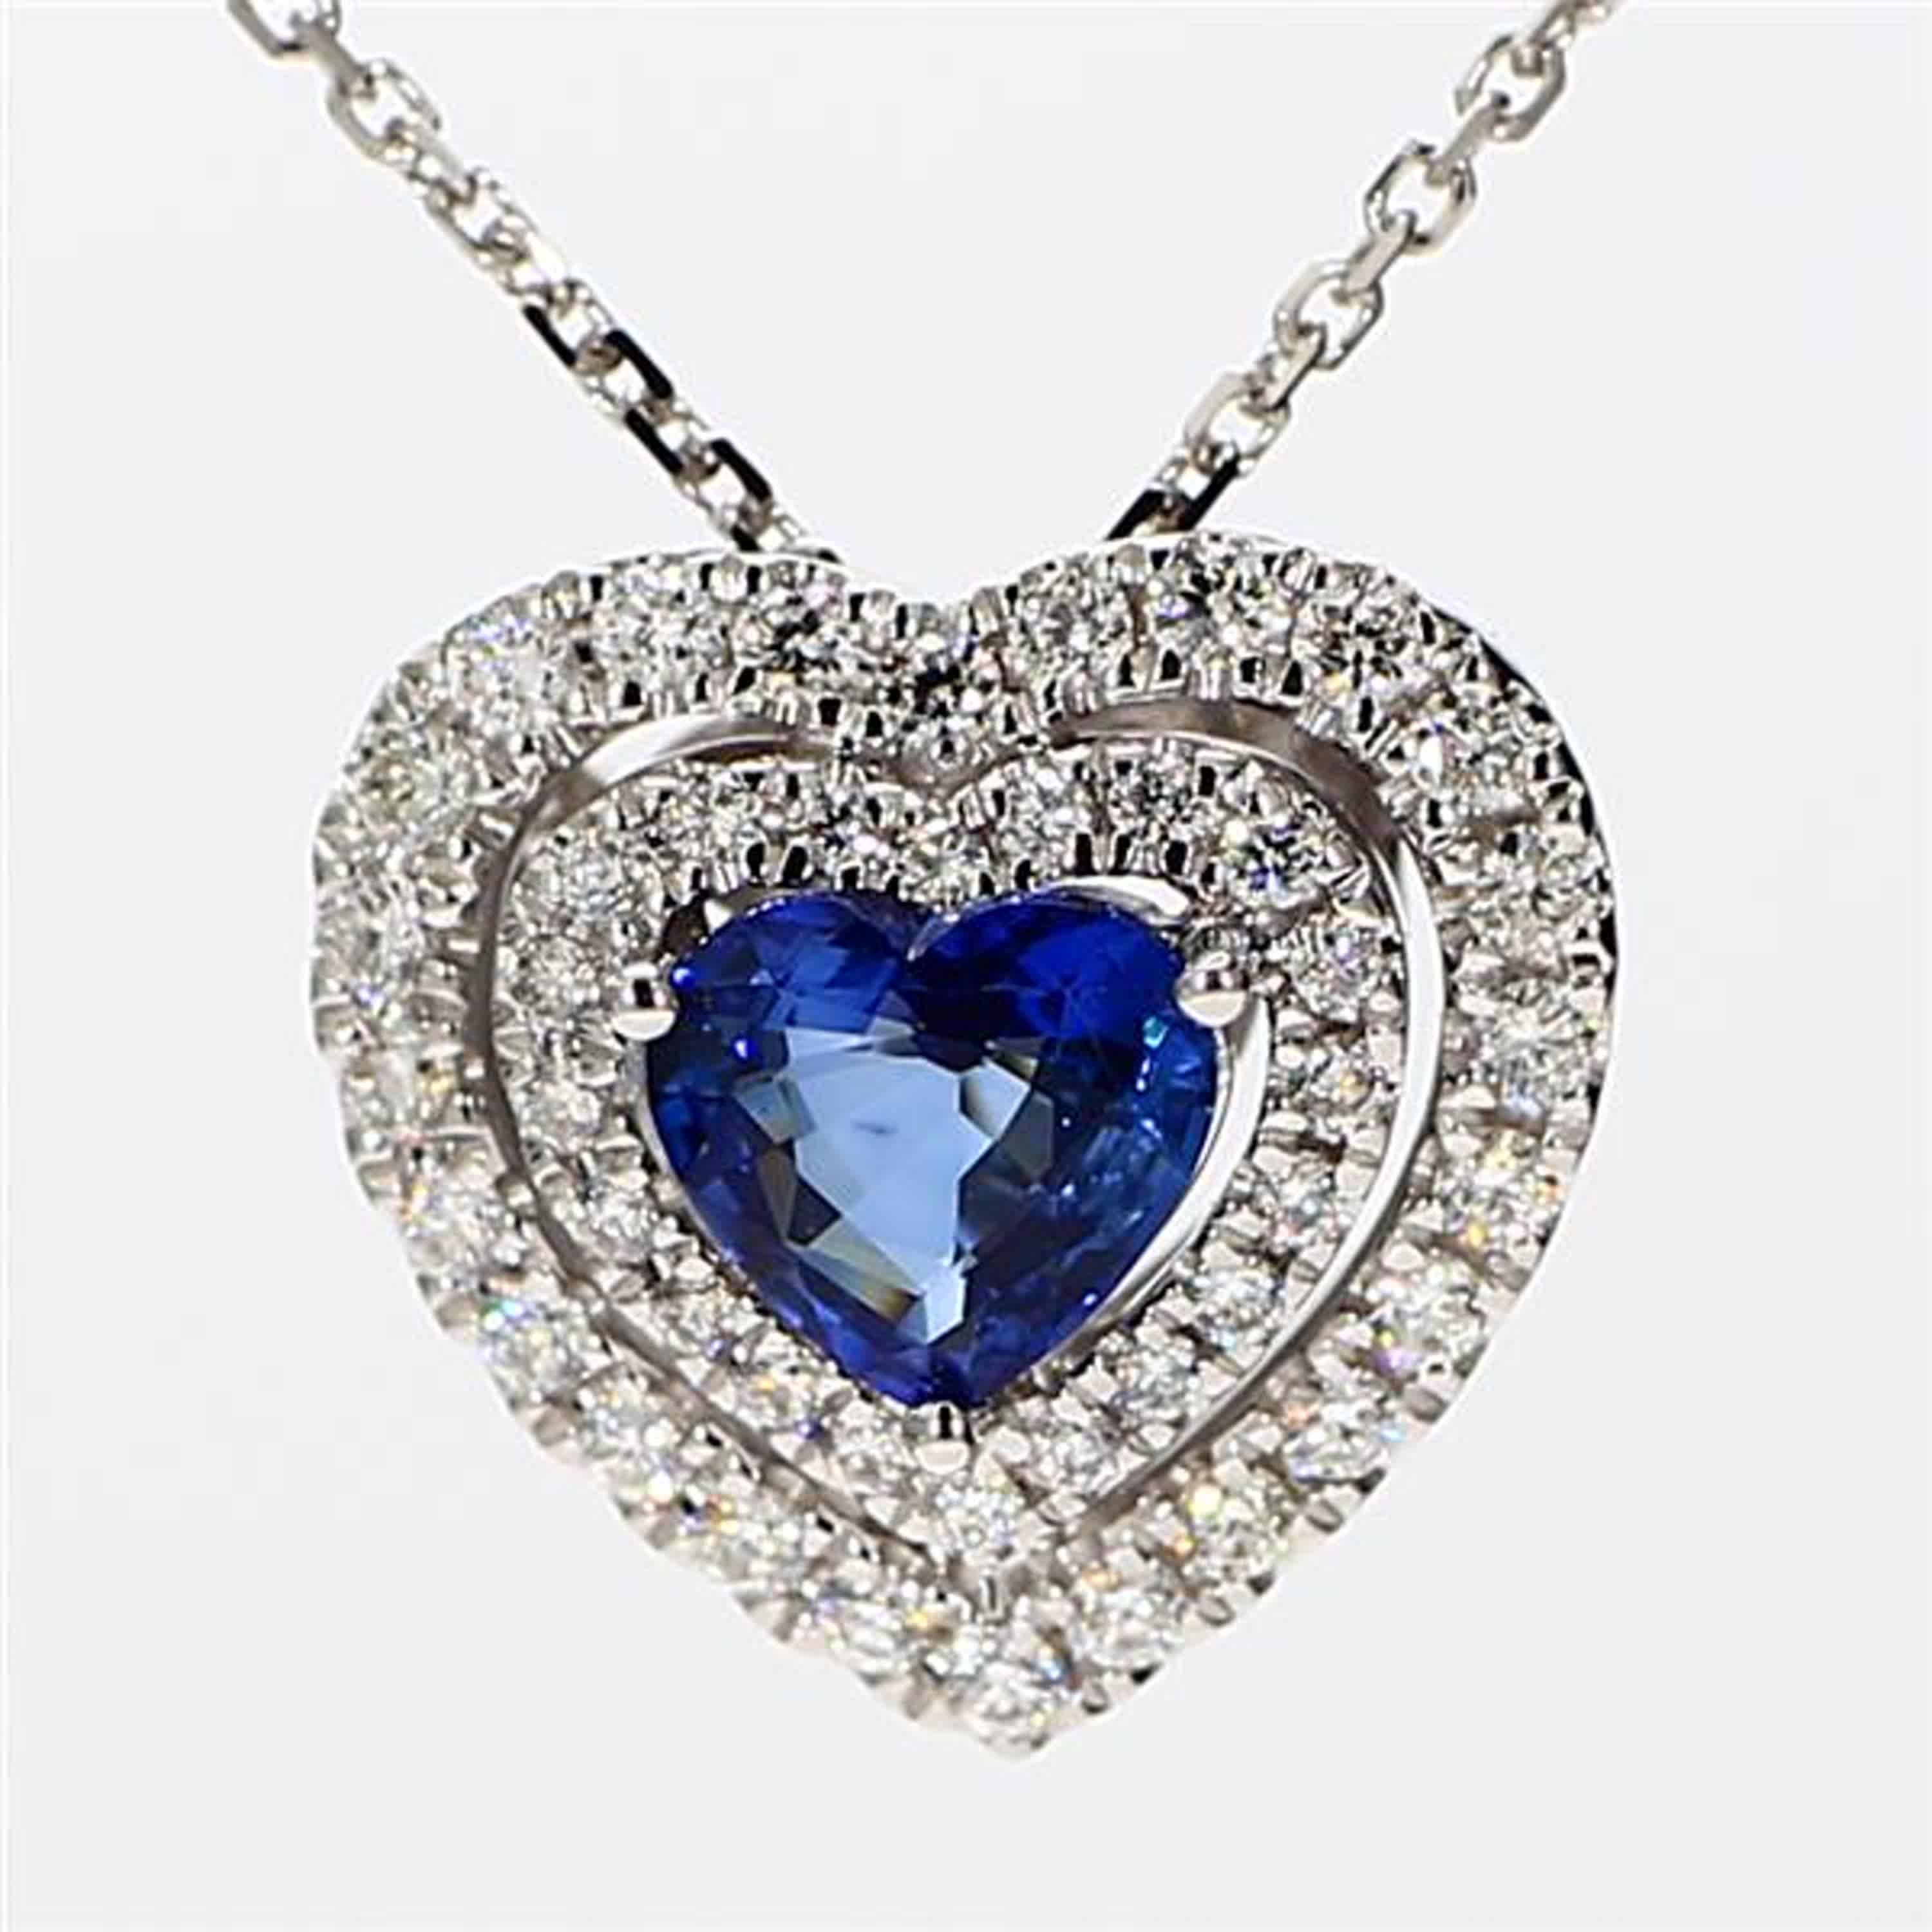 RareGemWorld's classic sapphire pendant. Mounted in a beautiful 18K White Gold setting with a natural heart cut blue sapphire. The sapphire is surrounded by natural round white diamond melee. This pendant is guaranteed to impress and enhance your